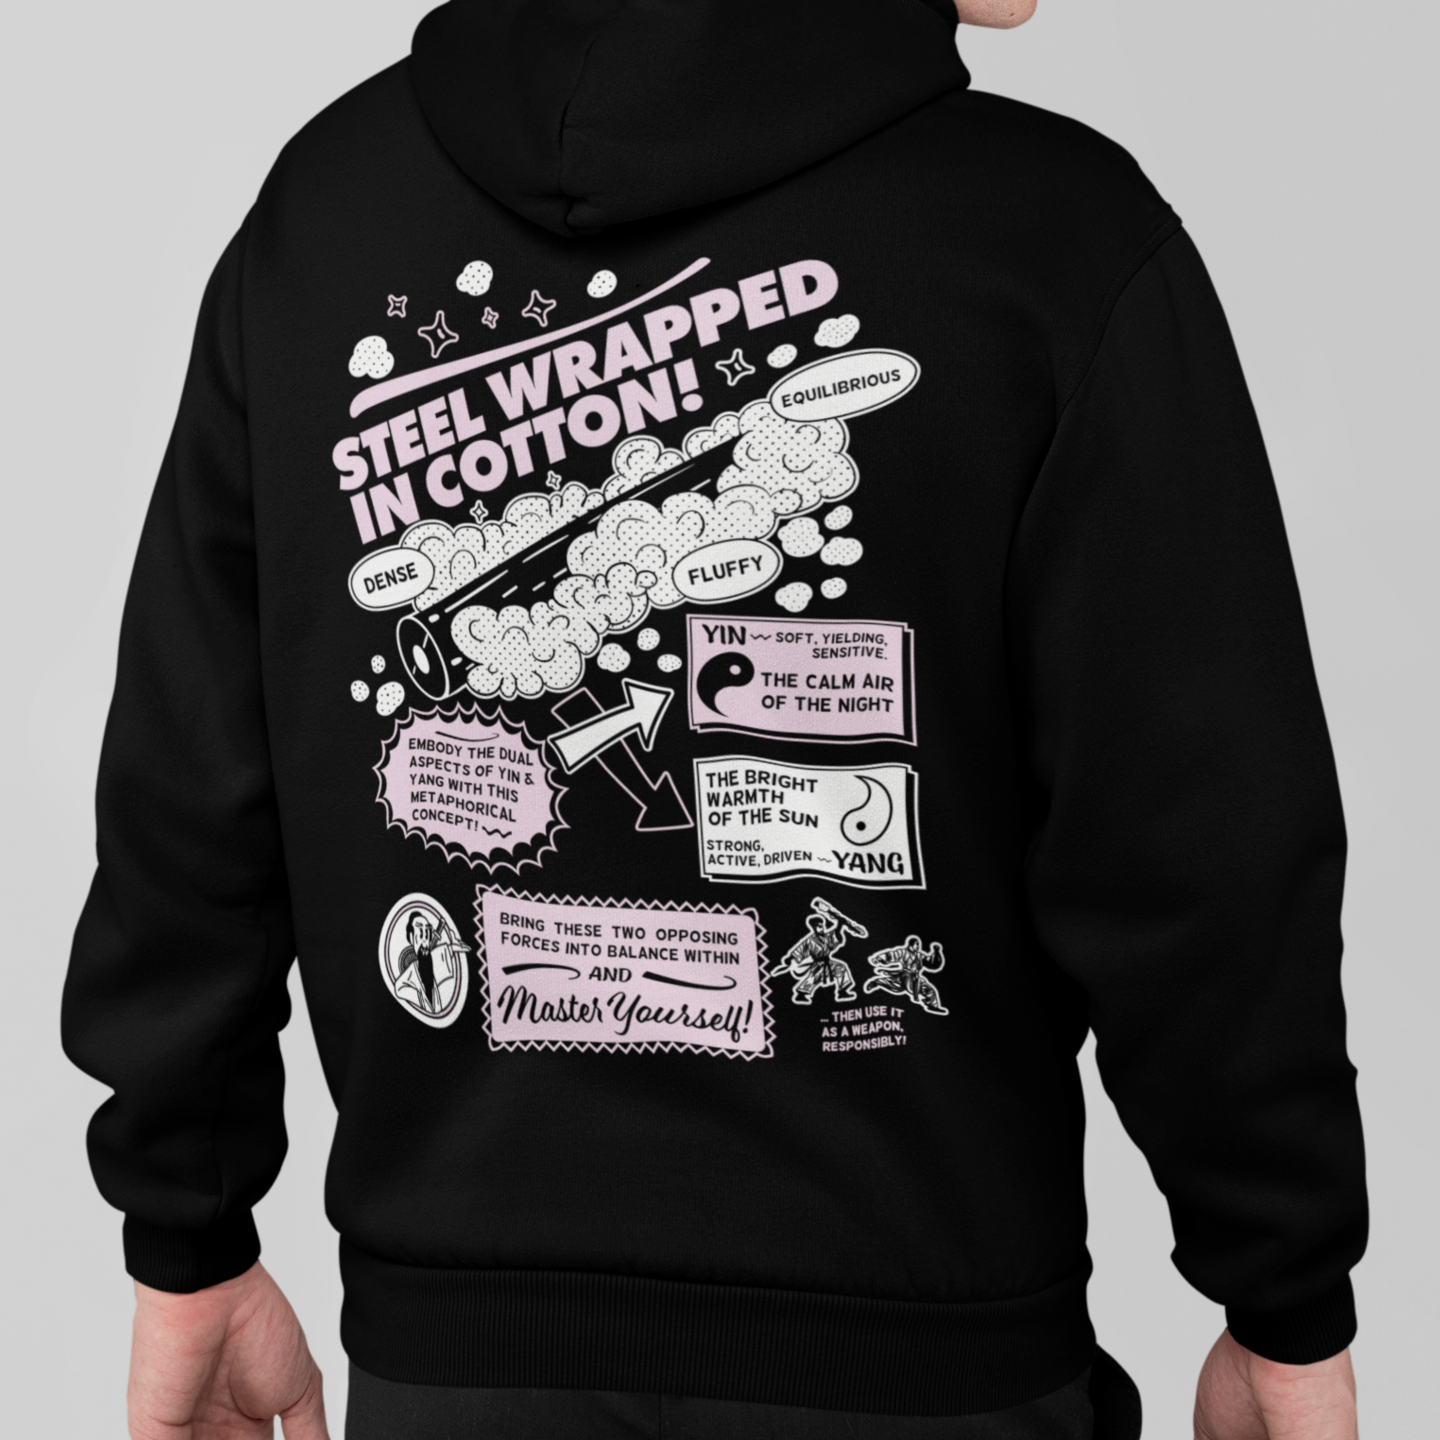 back view of a male model wearing a black zip up hoodie with steel wrapped in cotton design in white and pink text 